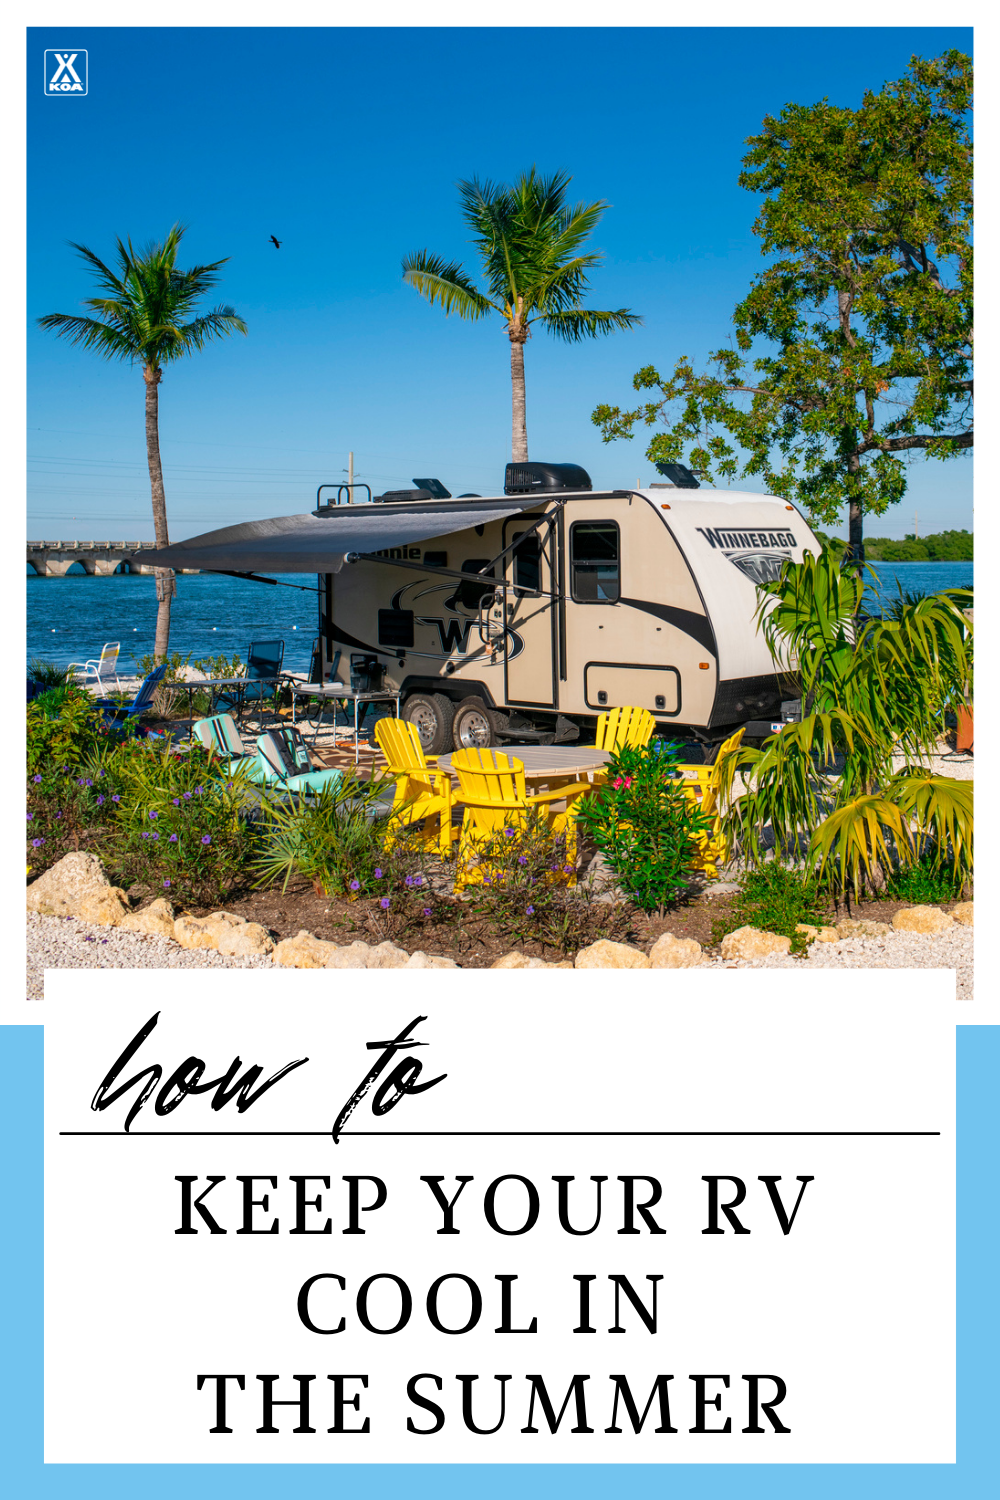 High temperatures, combined with a lack of a powerful central air conditioning system, can quickly turn your home away from home into a too-hot spot. These handy tips will help you keep your RV cool this summer, so the whole family can beat the heat.